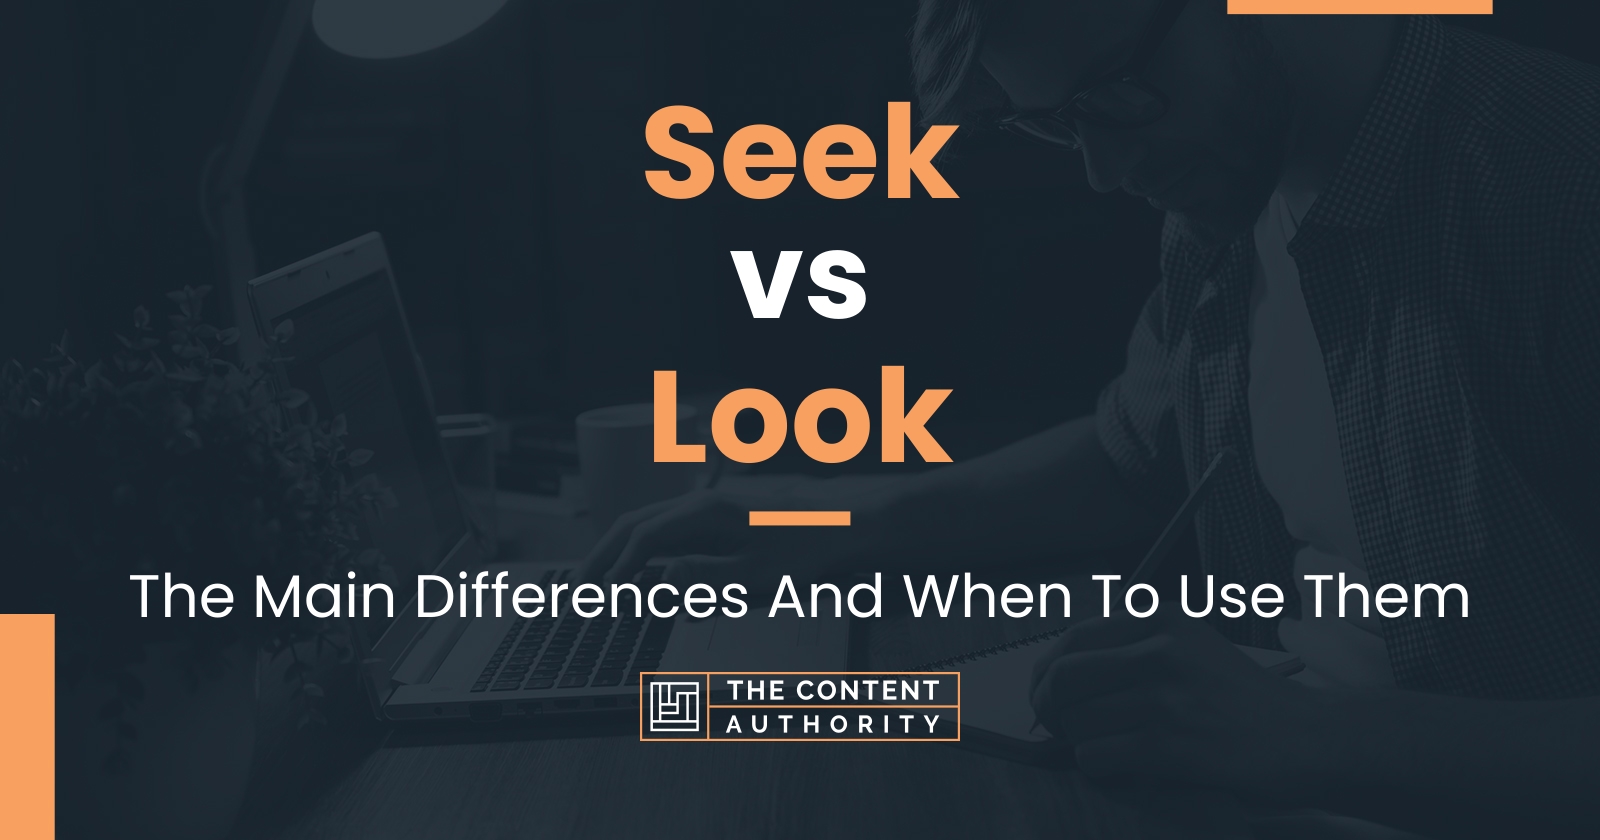 Seek vs Look: The Main Differences And When To Use Them